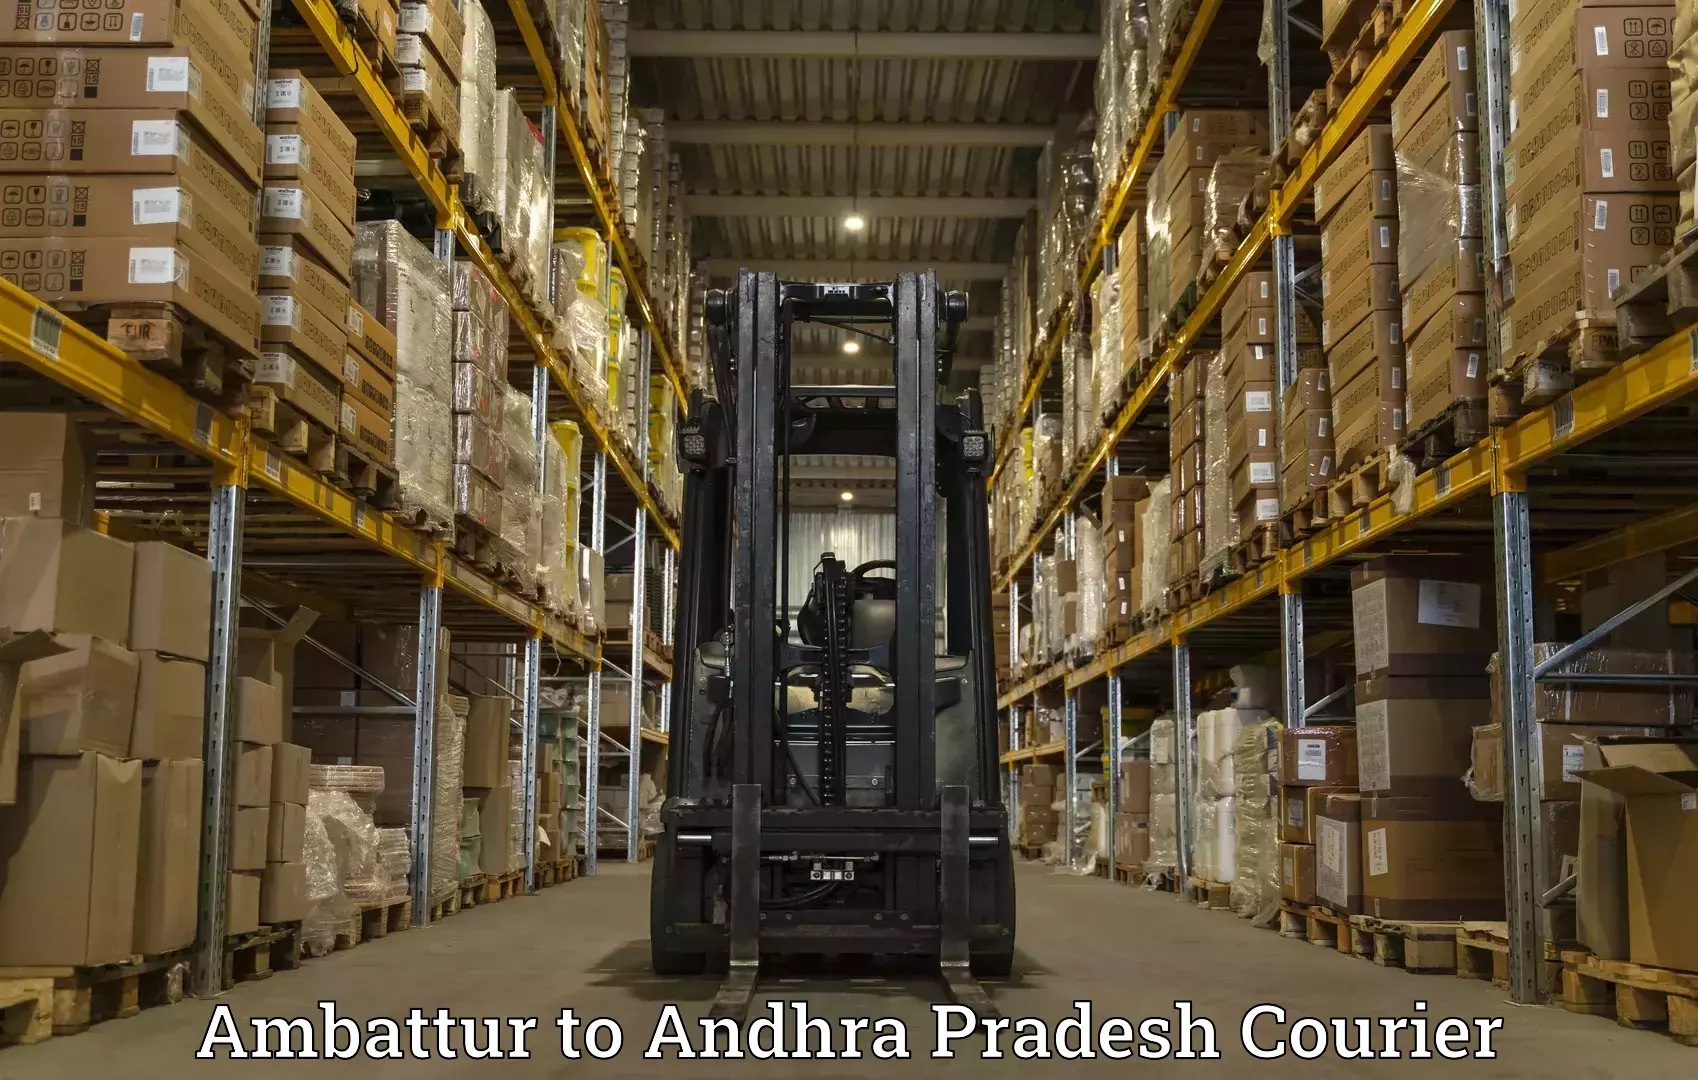 High value parcel delivery in Ambattur to Chintapalli